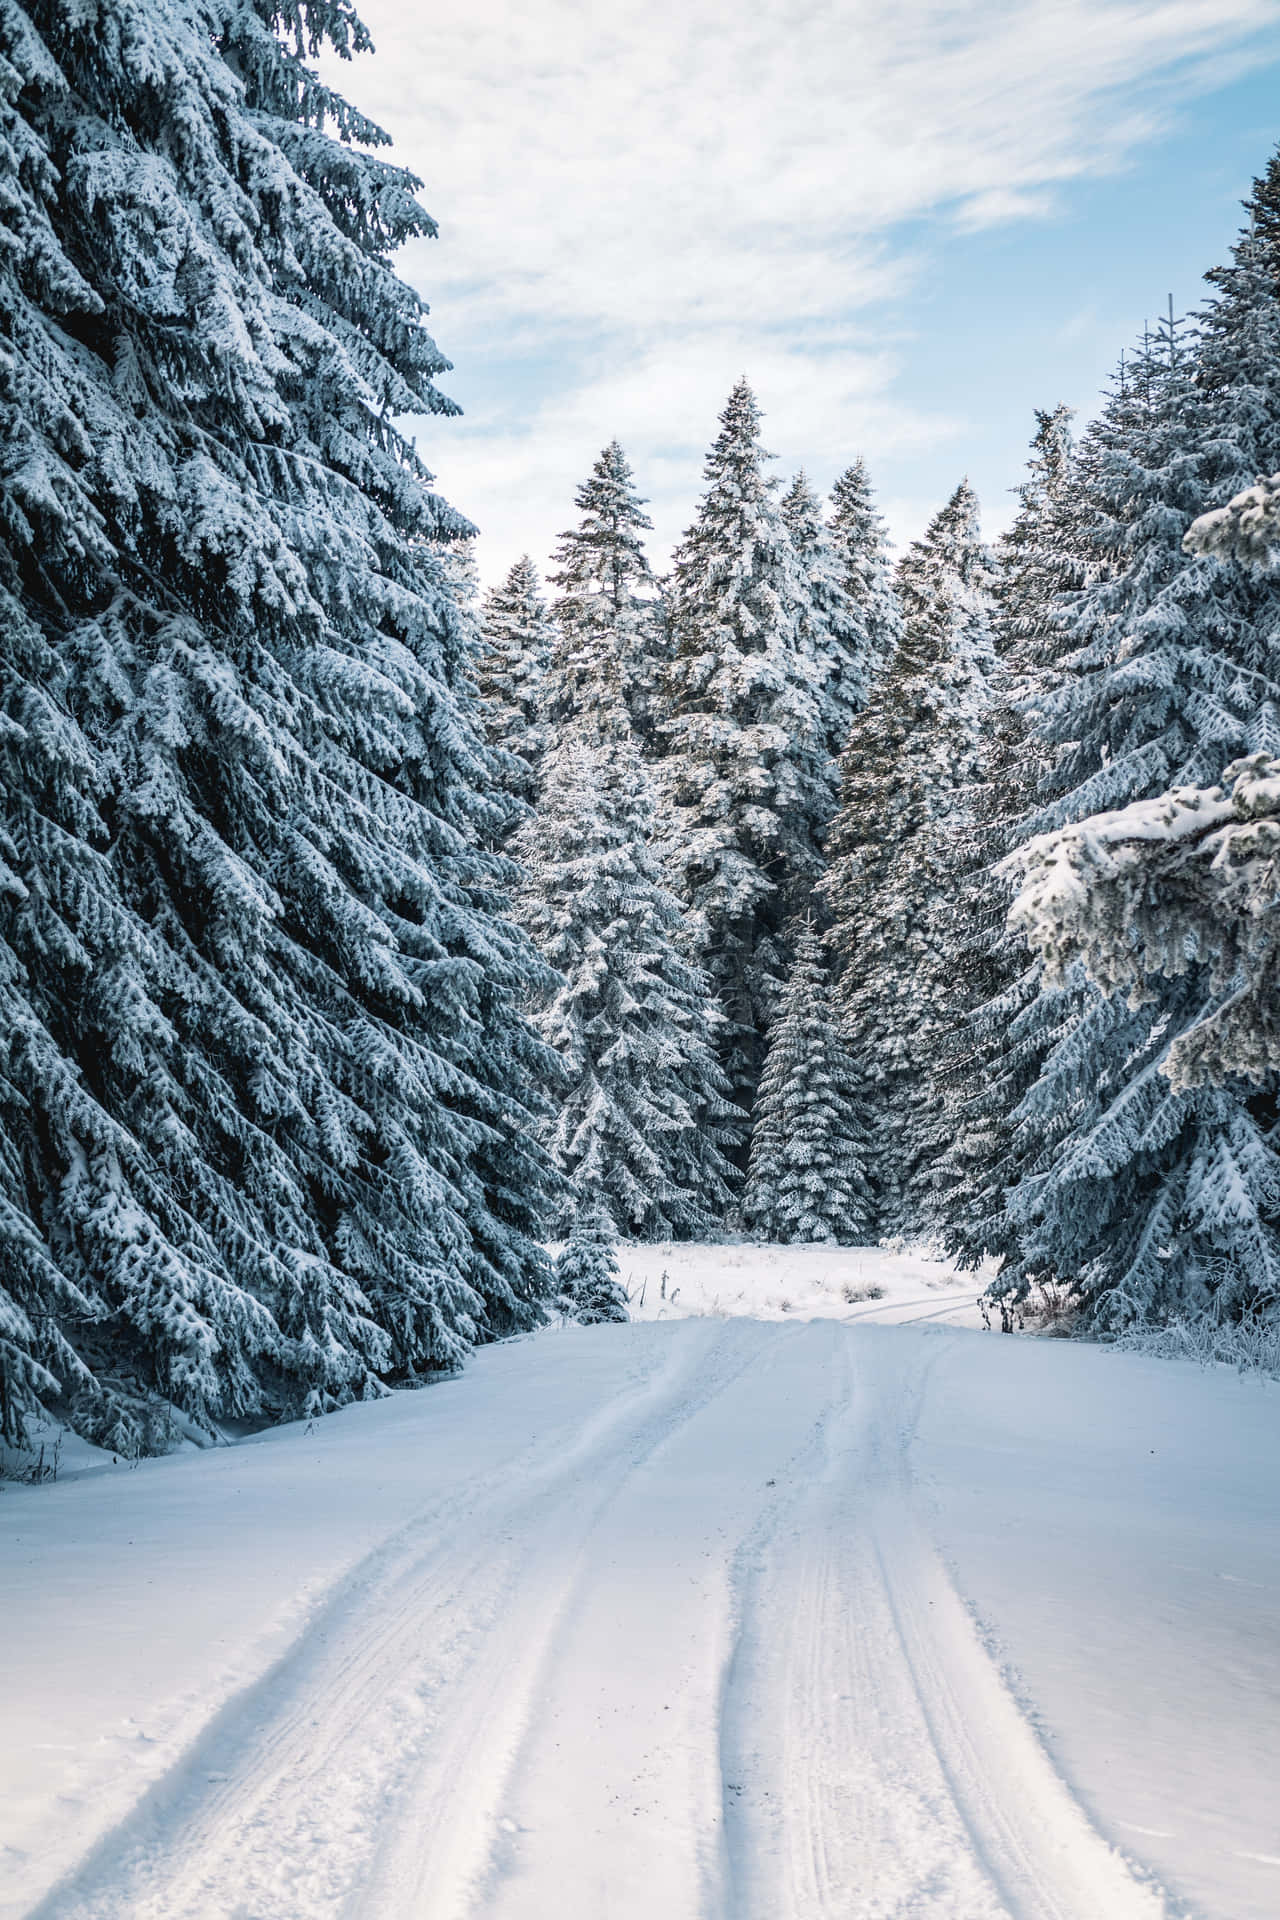 “Discover the Silence and Beauty of a Winter Forest”